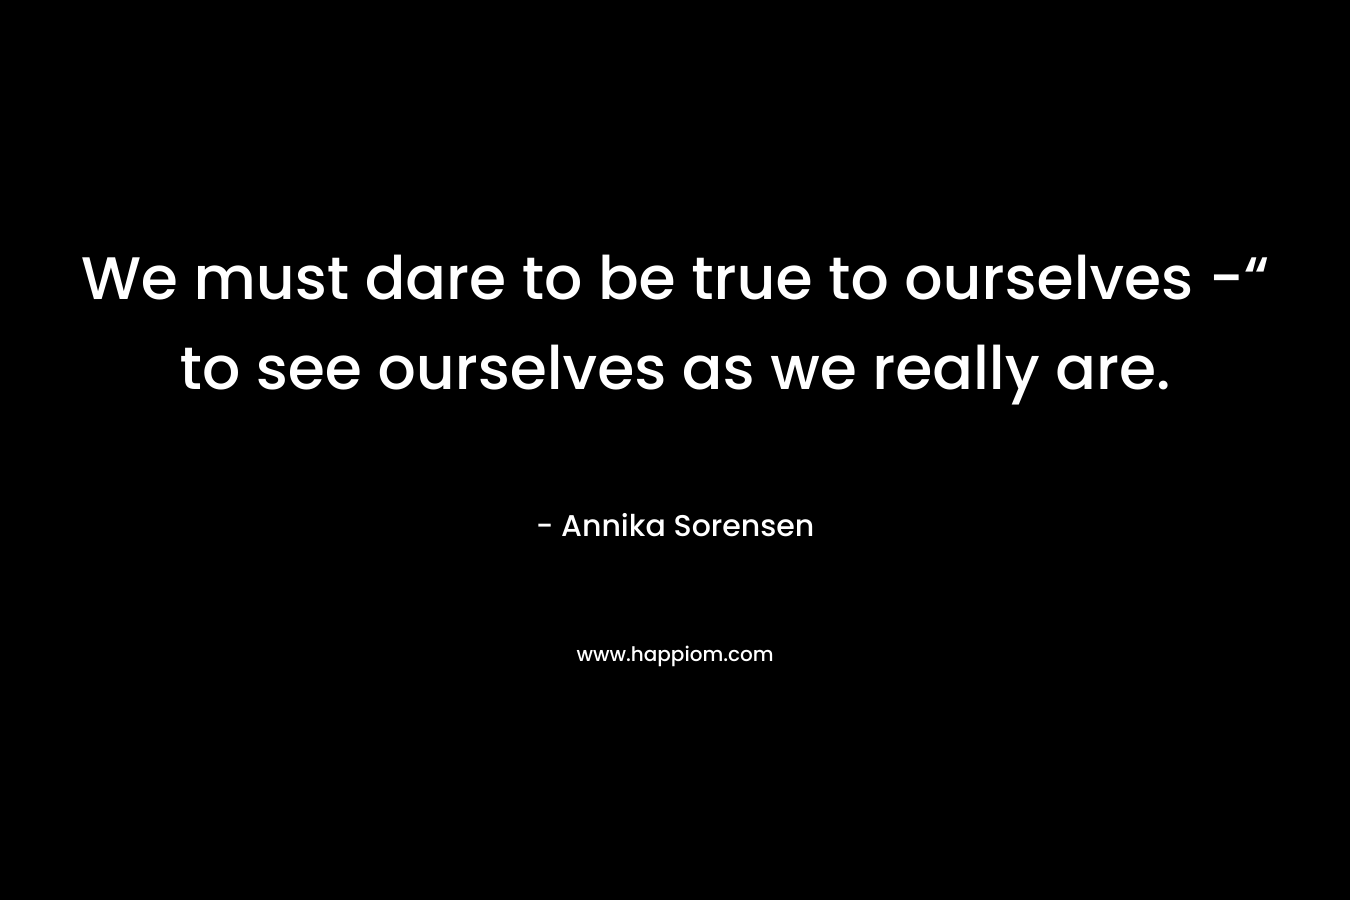 We must dare to be true to ourselves -“ to see ourselves as we really are.